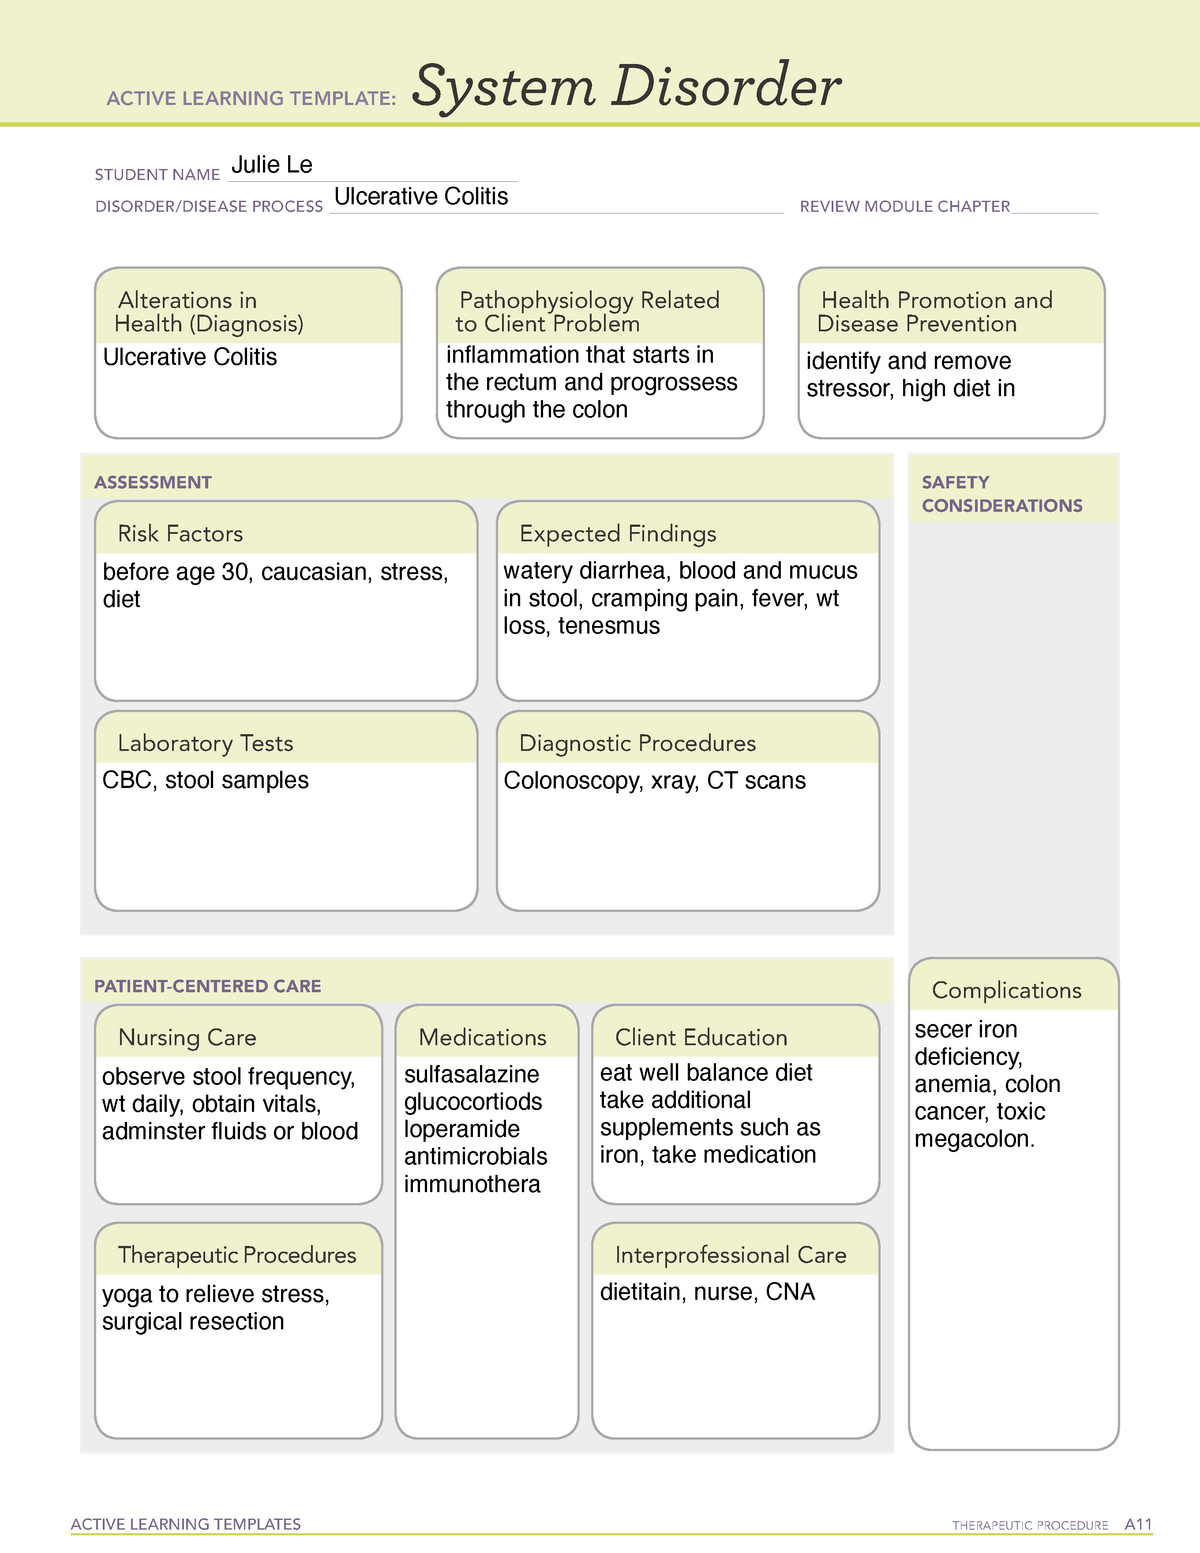 Active Learning Template sys Dis copy - ACTIVE LEARNING TEMPLATES ...